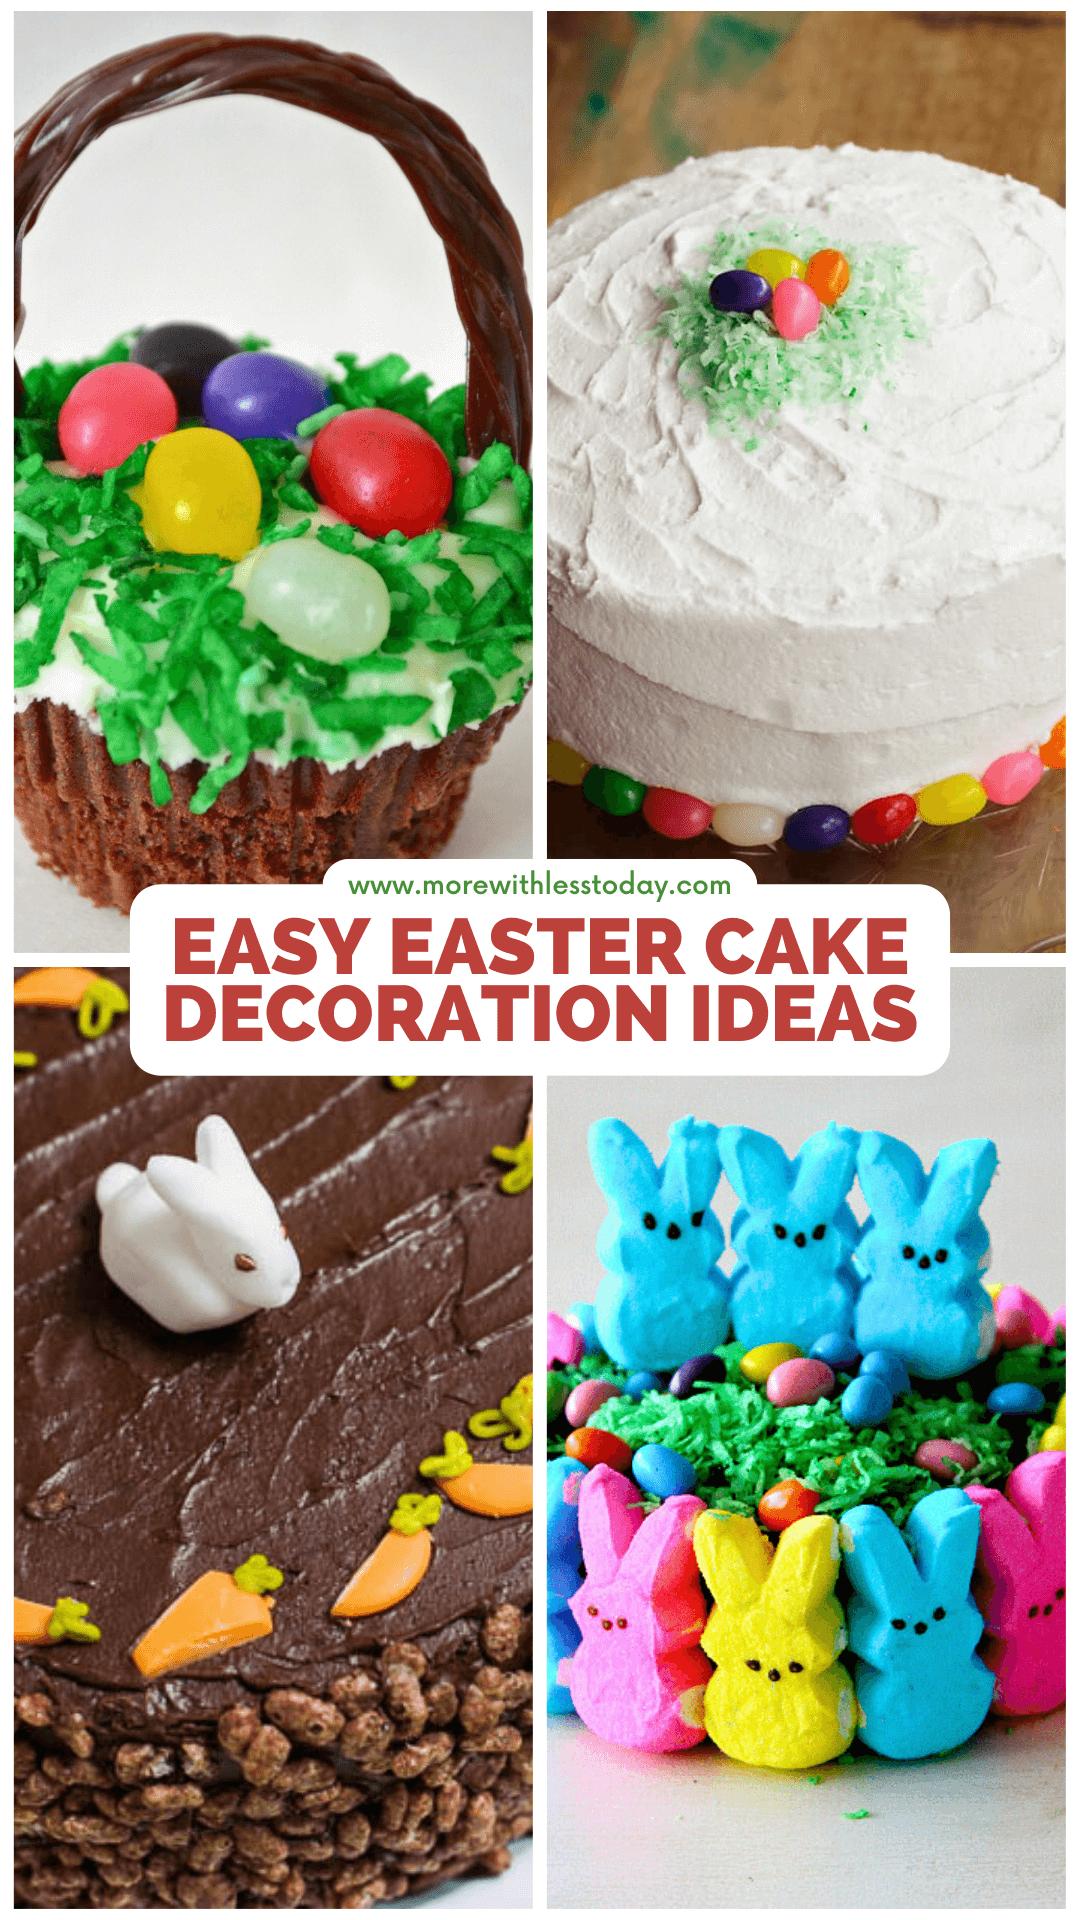 Easy Easter Cake Decoration Ideas - PIN